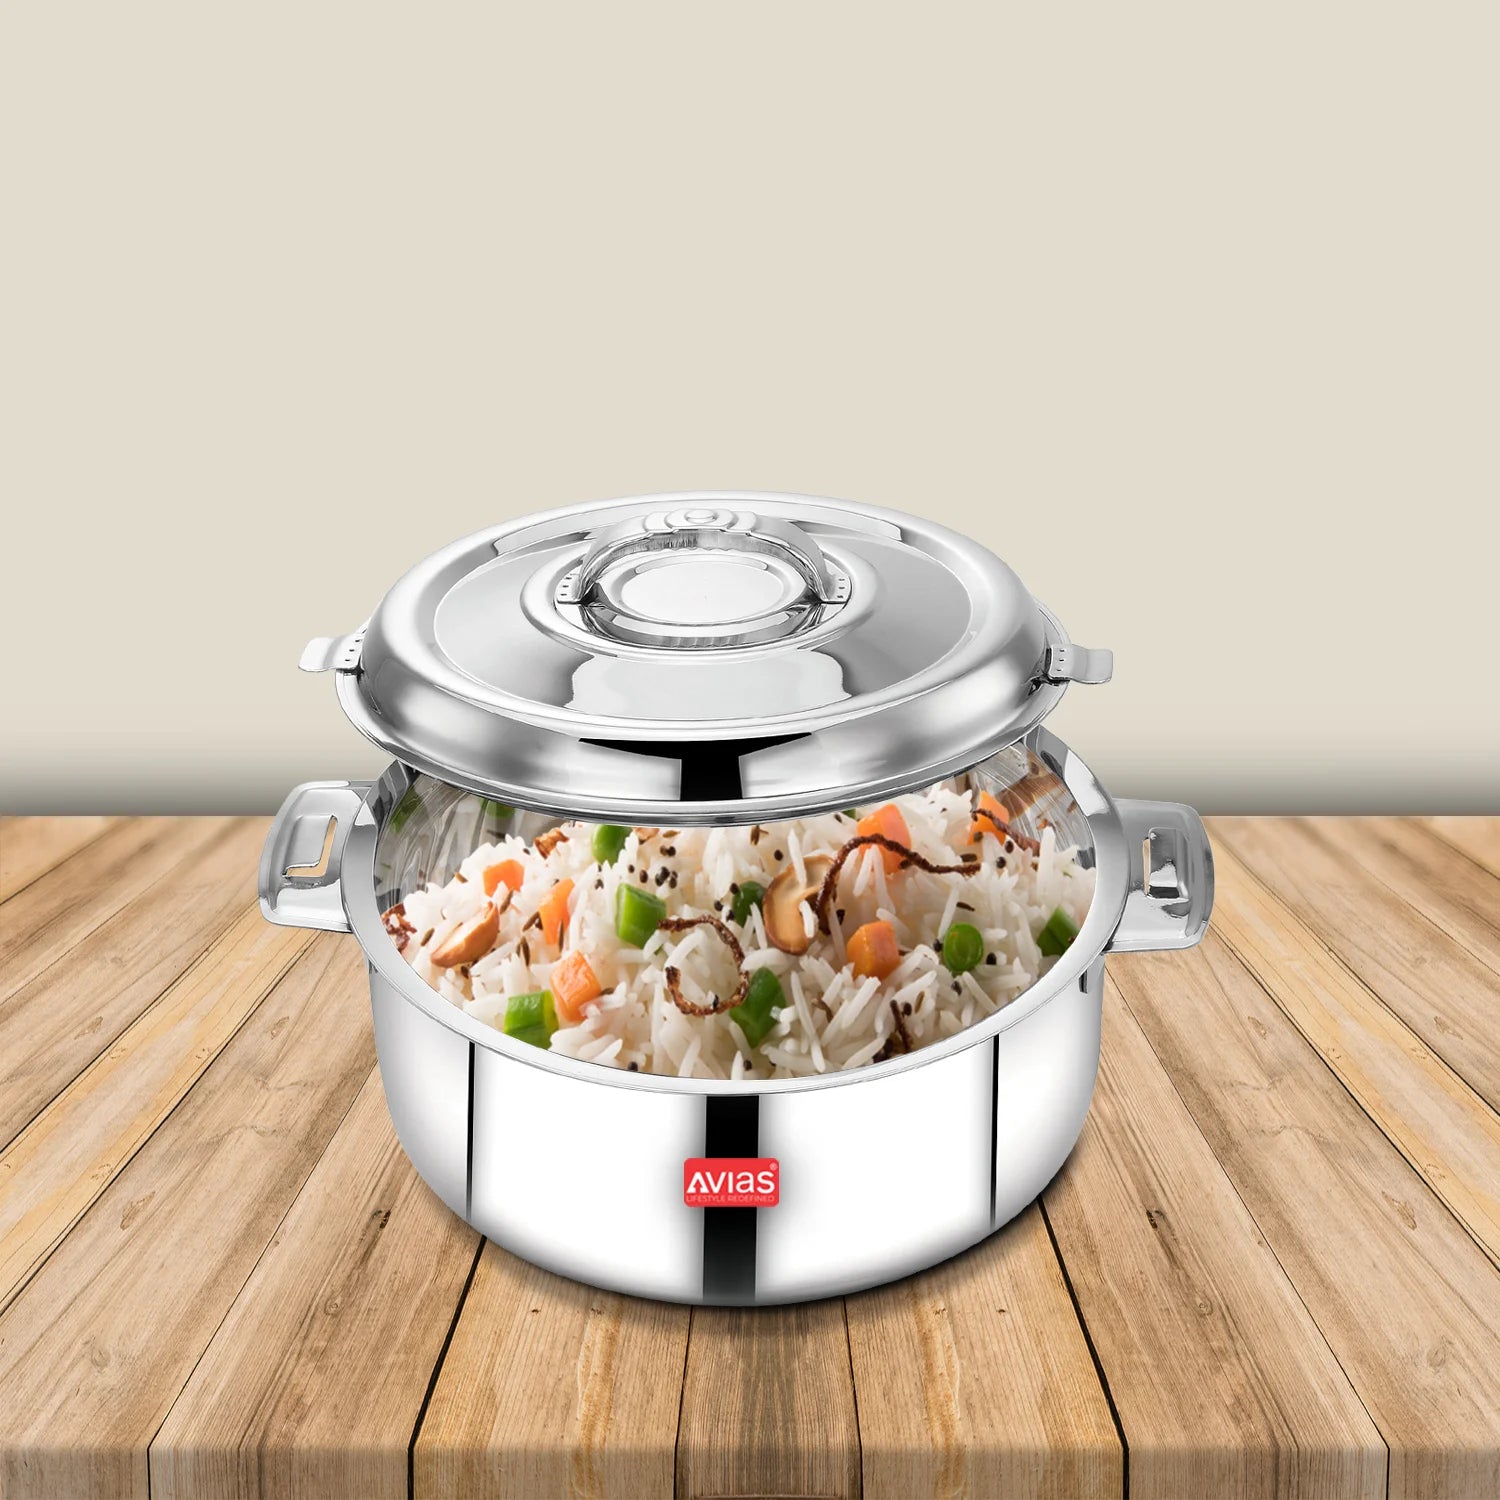 AVIAS Avistar double wall insulated stainless steel casserole/ hotpot/ chapati box/ hot case with lid